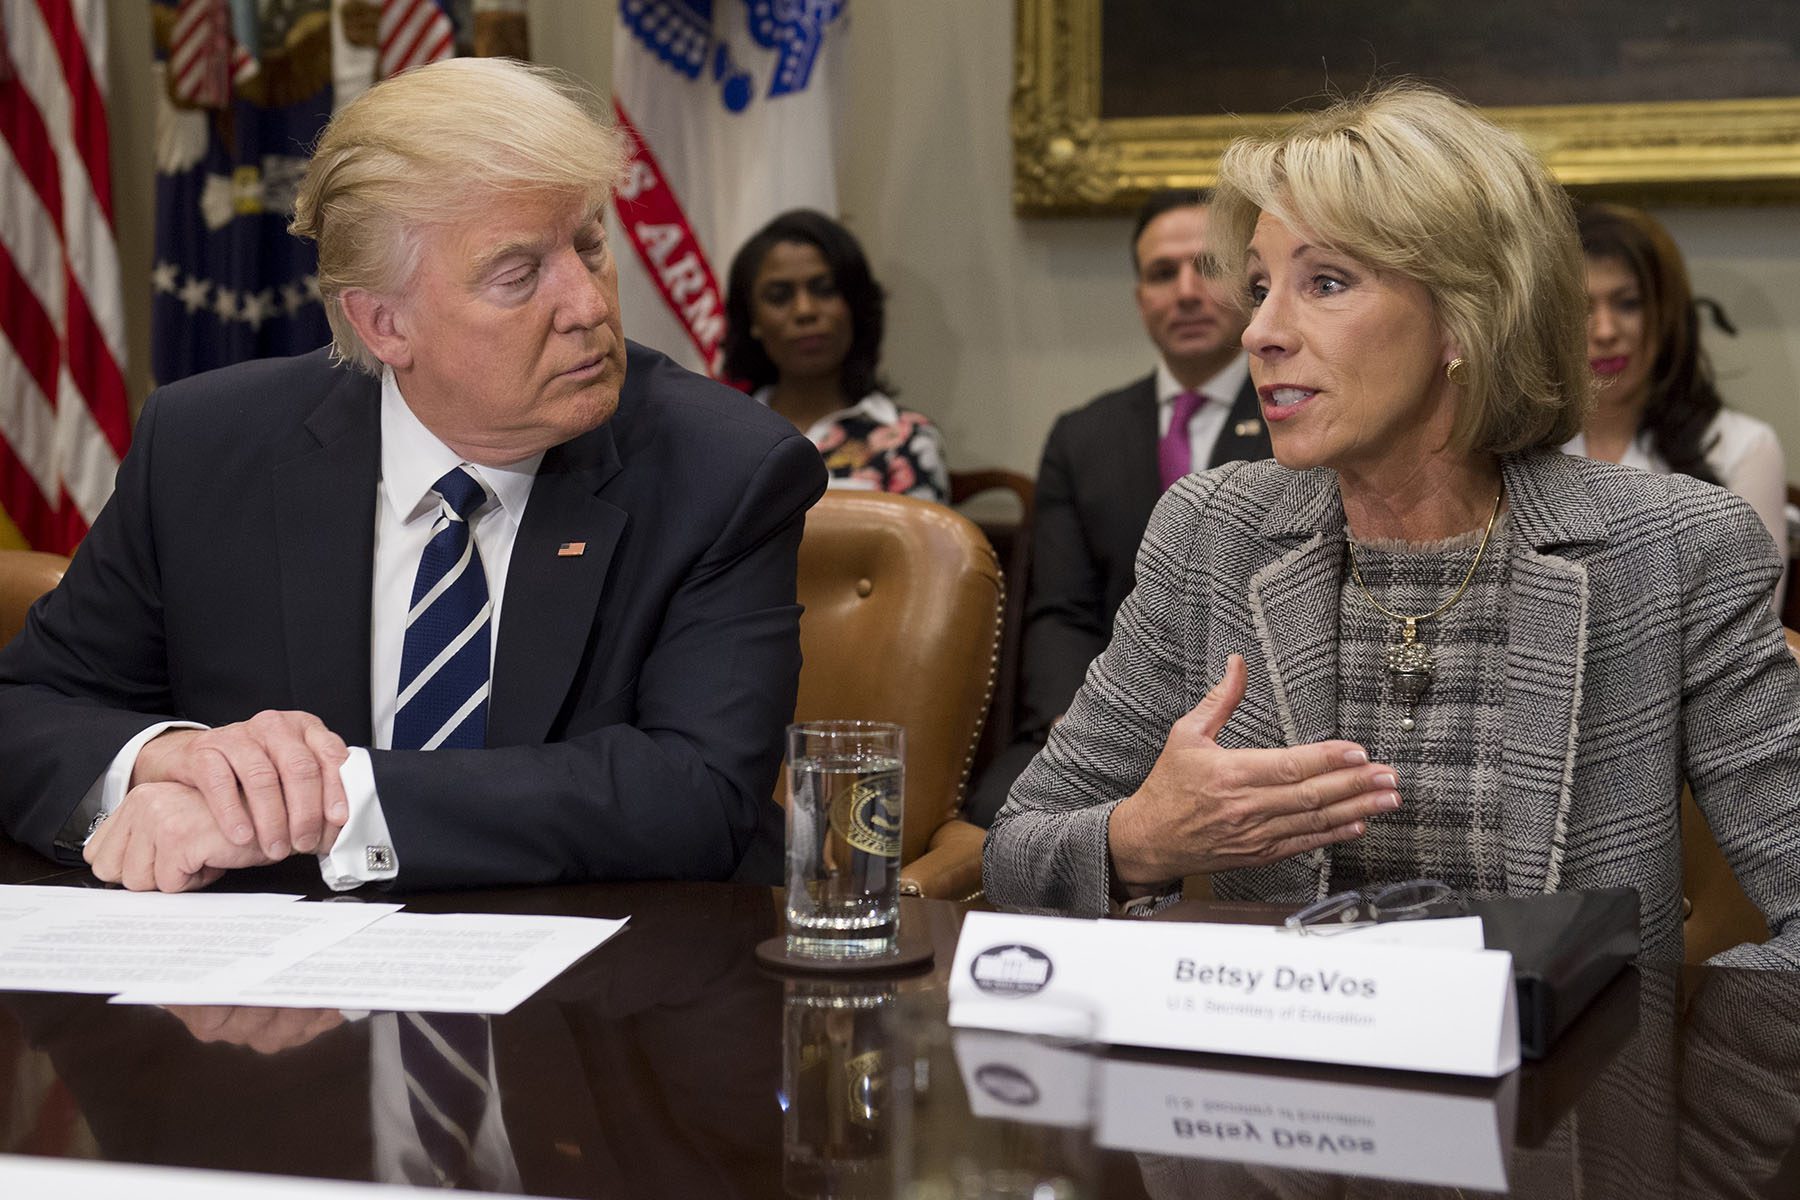 President Trump and Secretary of Education Betsy DeVos attend a meeting with teachers, school administrators and parents.